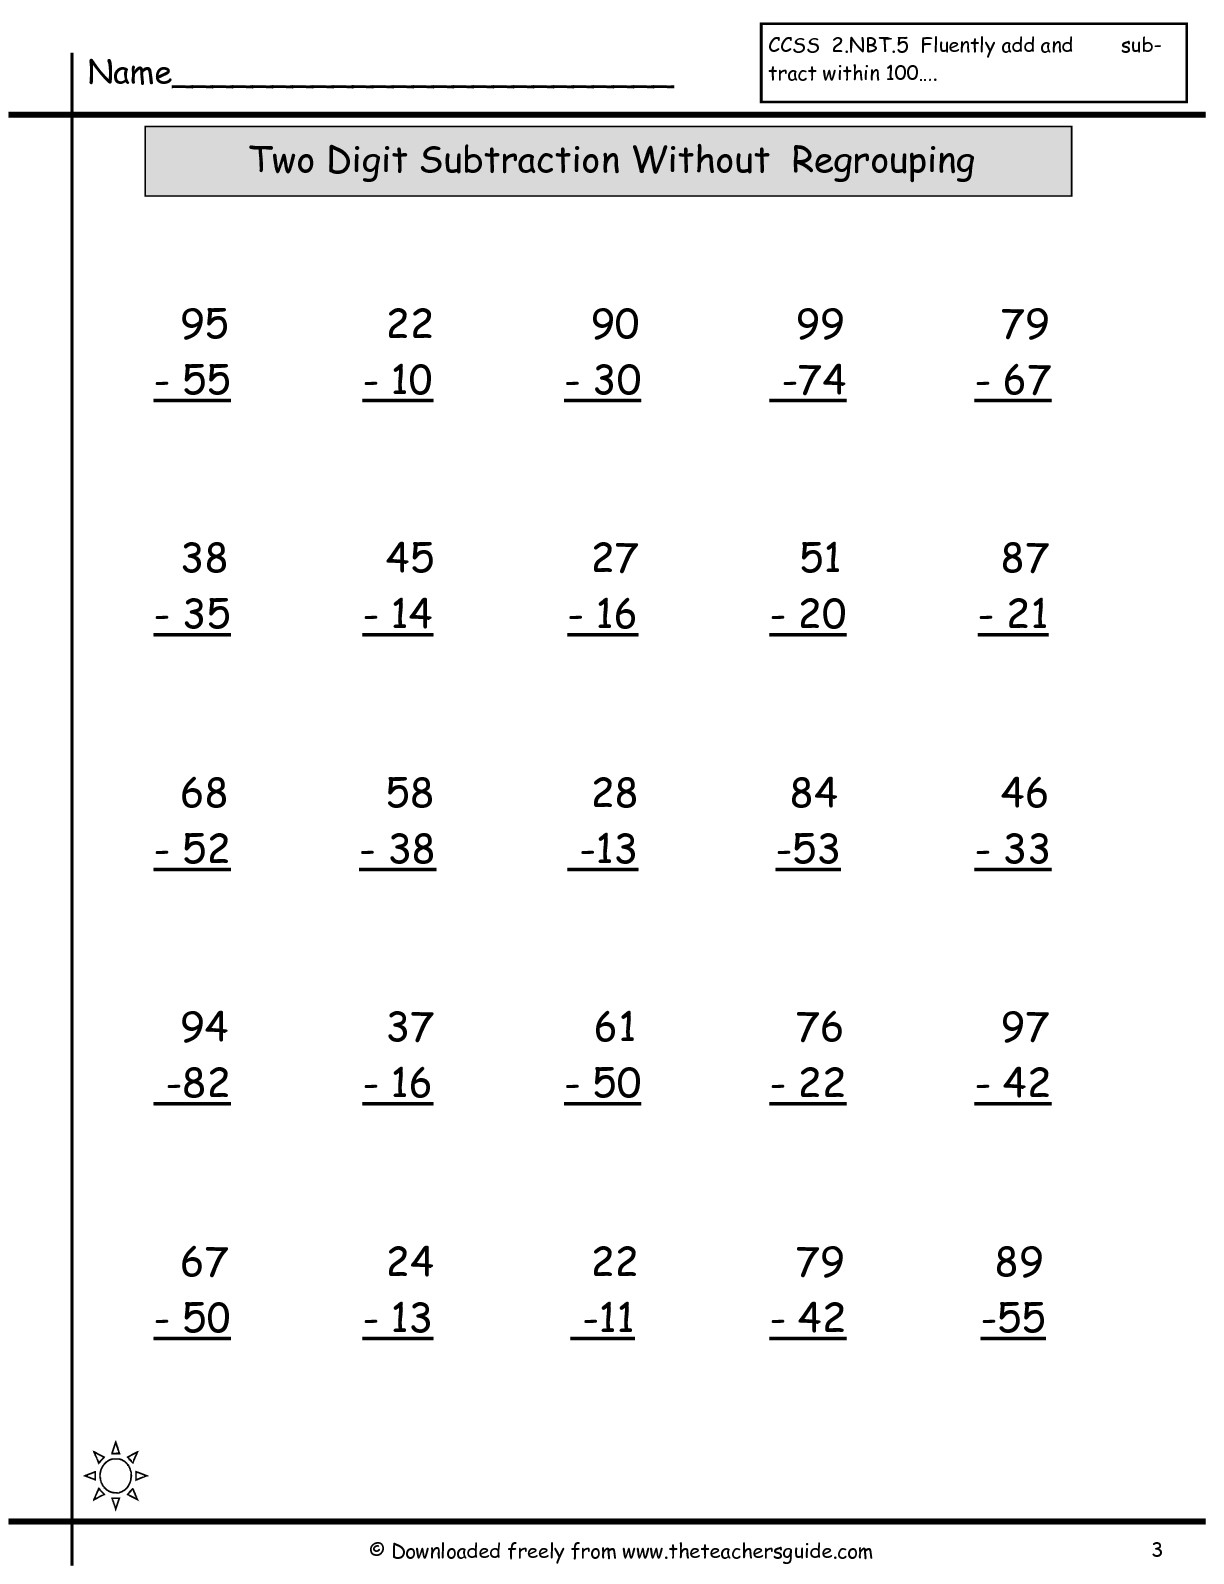 Free Math Printouts From The Teacher&amp;#039;s Guide - Free Printable Addition And Subtraction Worksheets